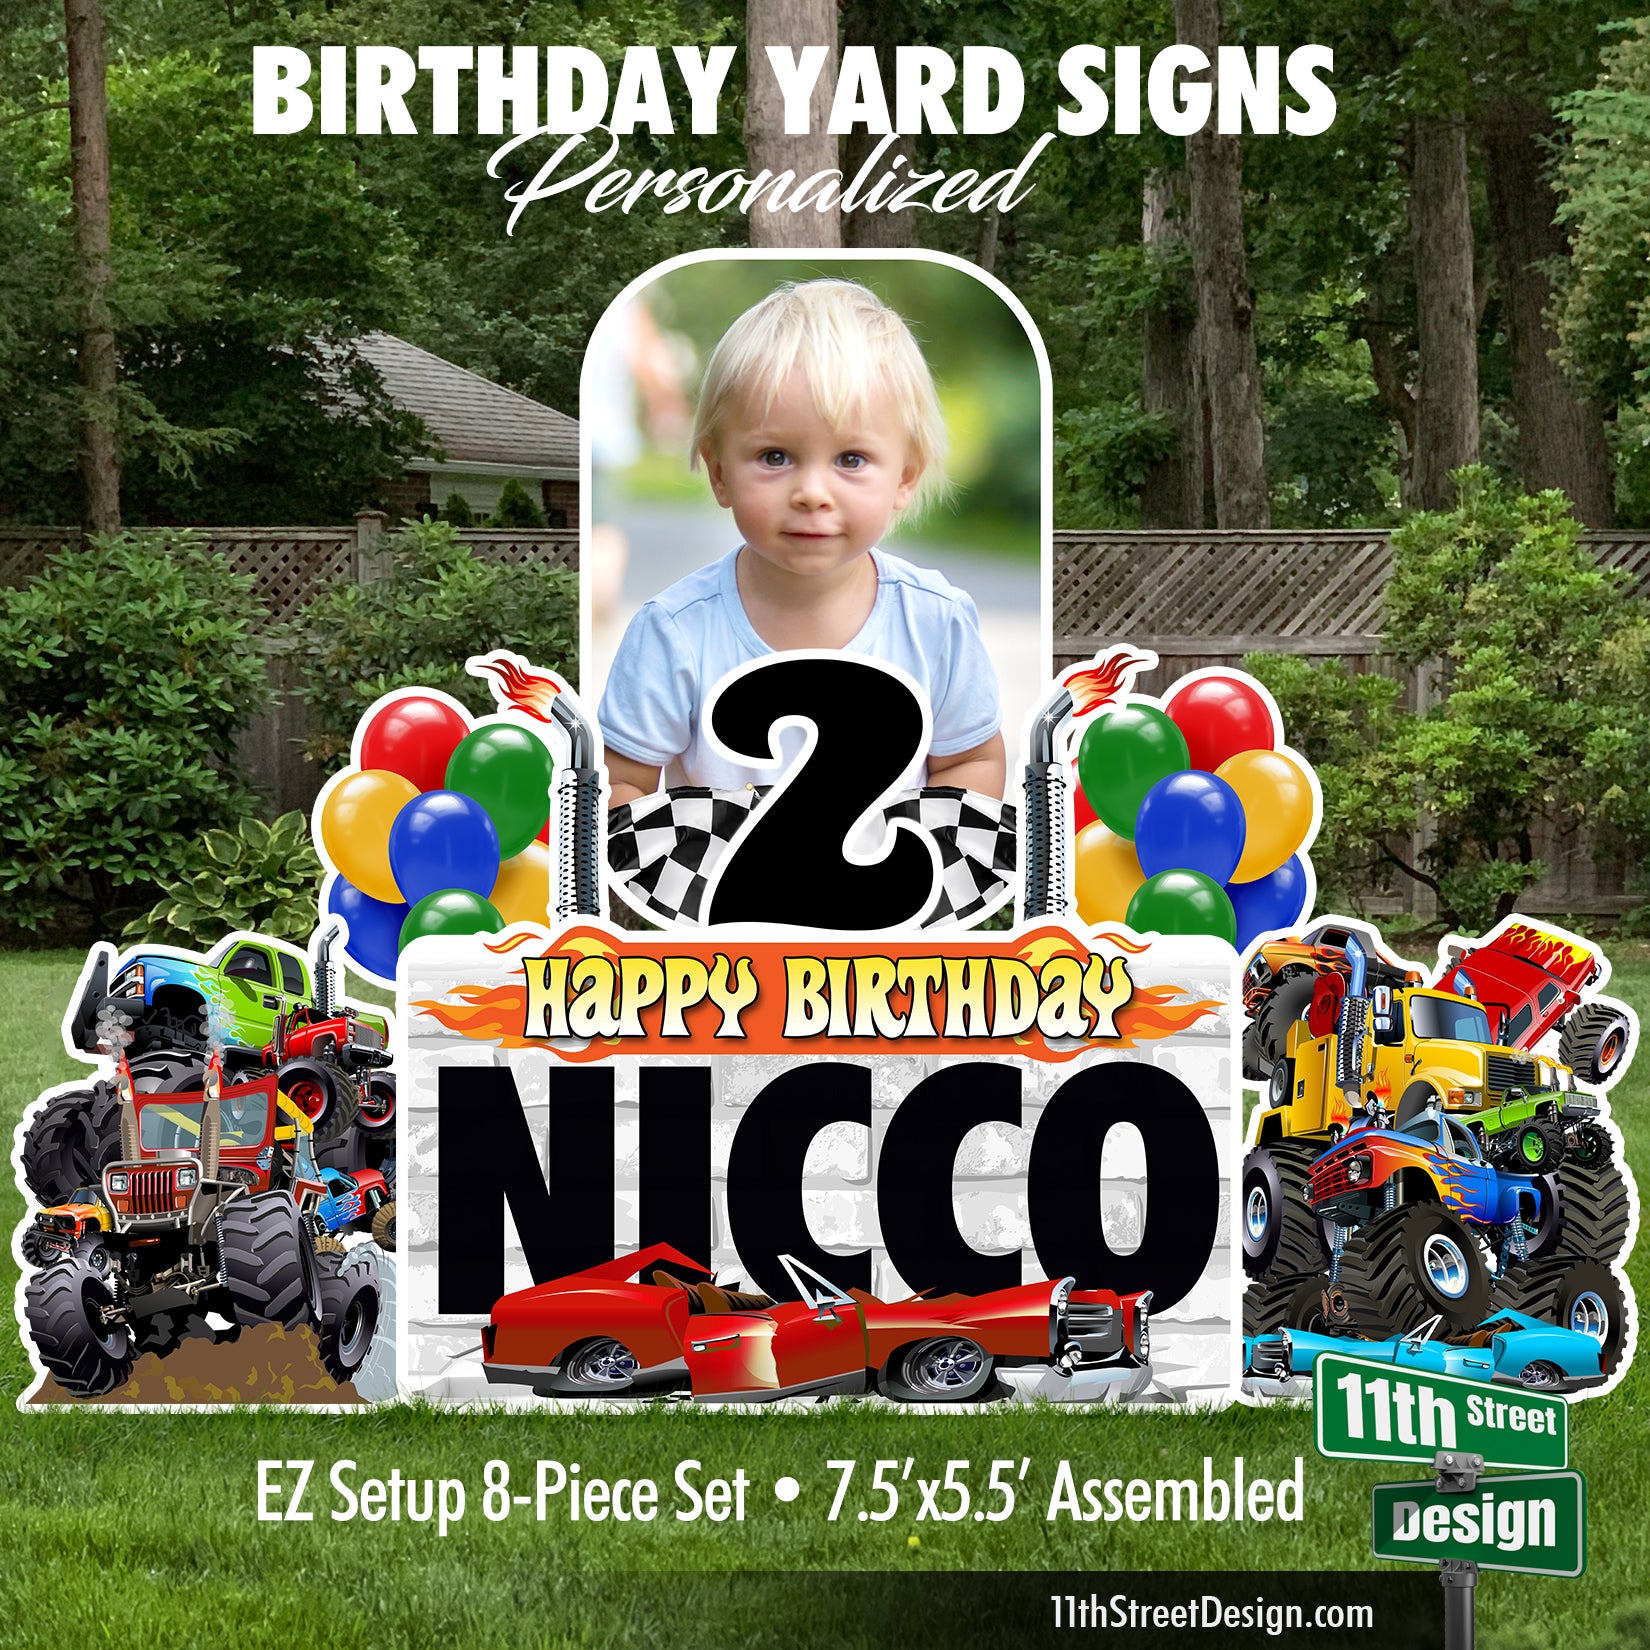 Birthday Decorations, Birthday Party, Custom Birthday Sign, Custom Name Sign, Custom Yard Sign, First Birthday, Happy Birthday Sign, Outdoor Signs, Party Decor, Personalized Decor, Personalized Name, Personalized Sign, Monster Truck Party,